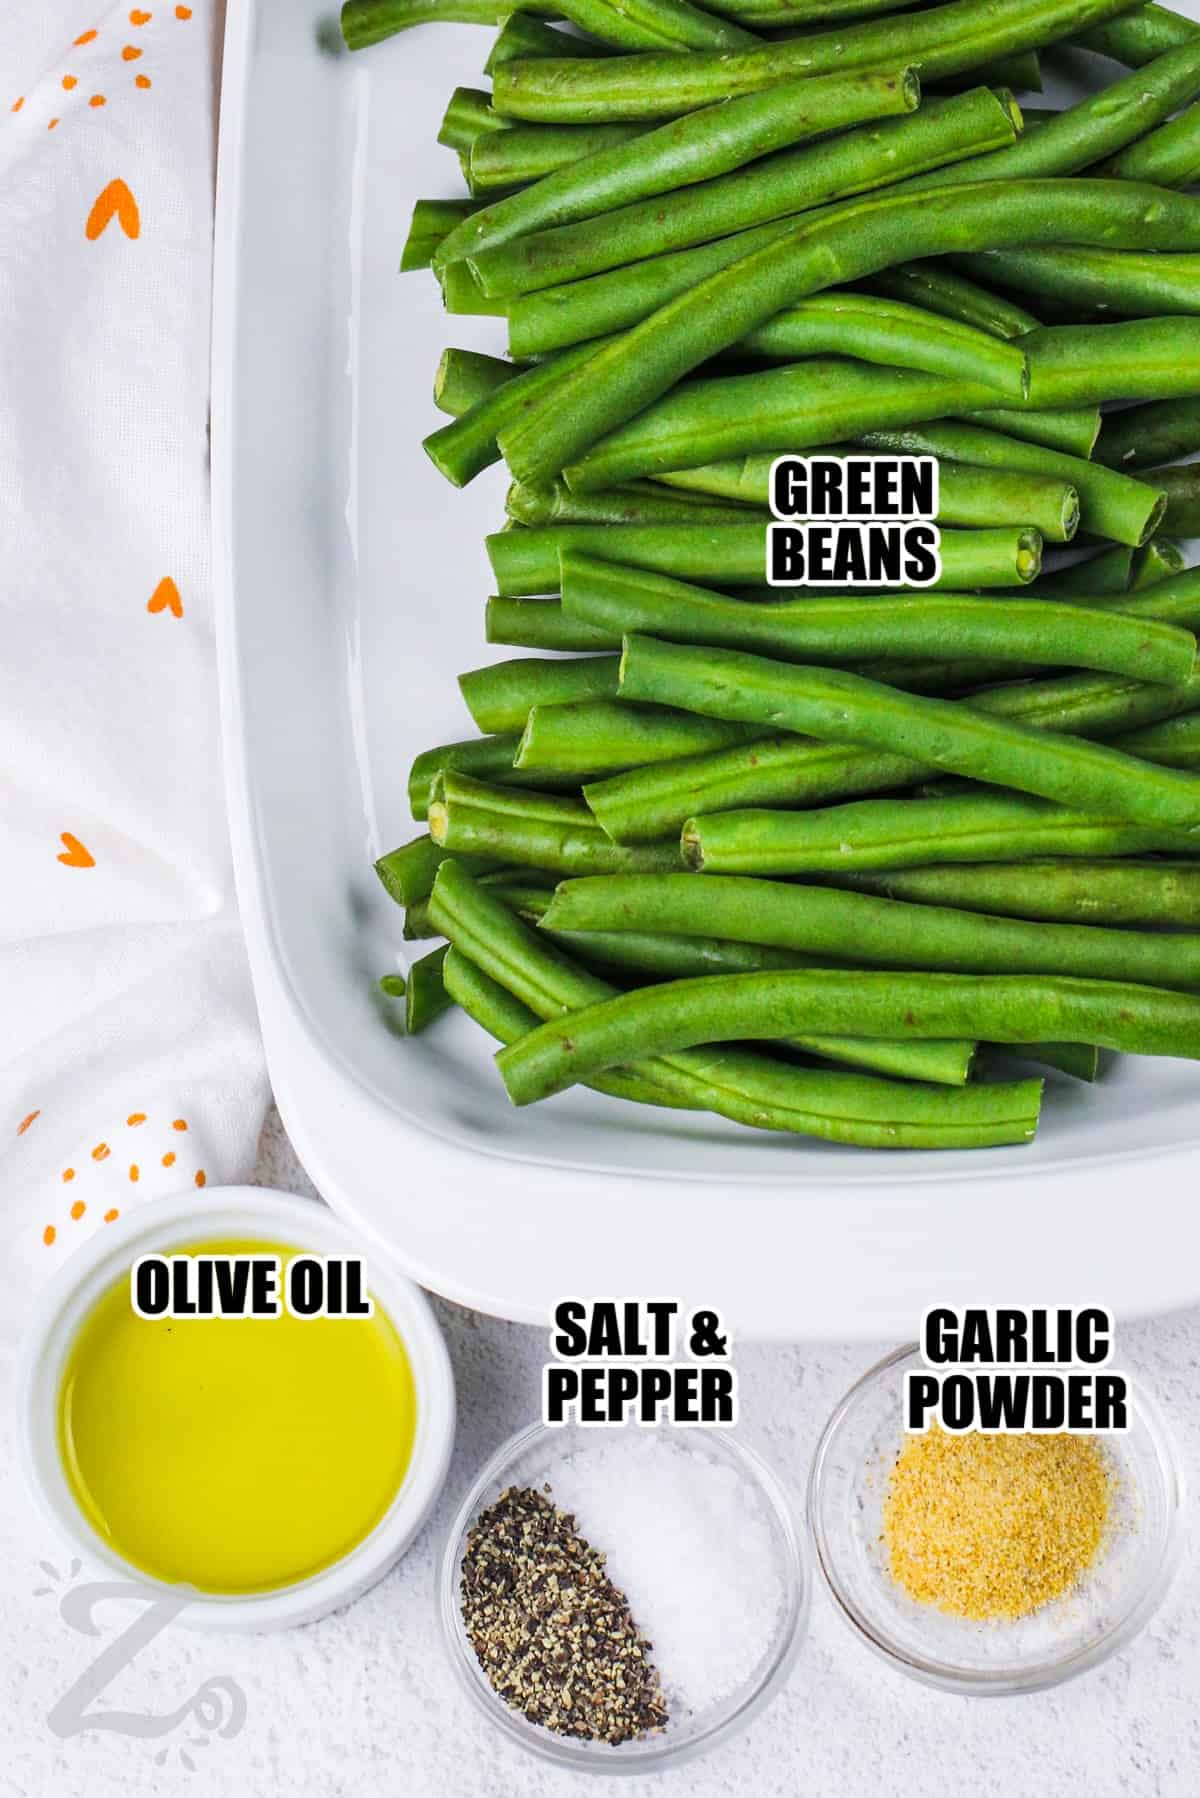 ingredients to make grilled green beans labeled: green beans, olive oil, salt and pepper, garlic powder